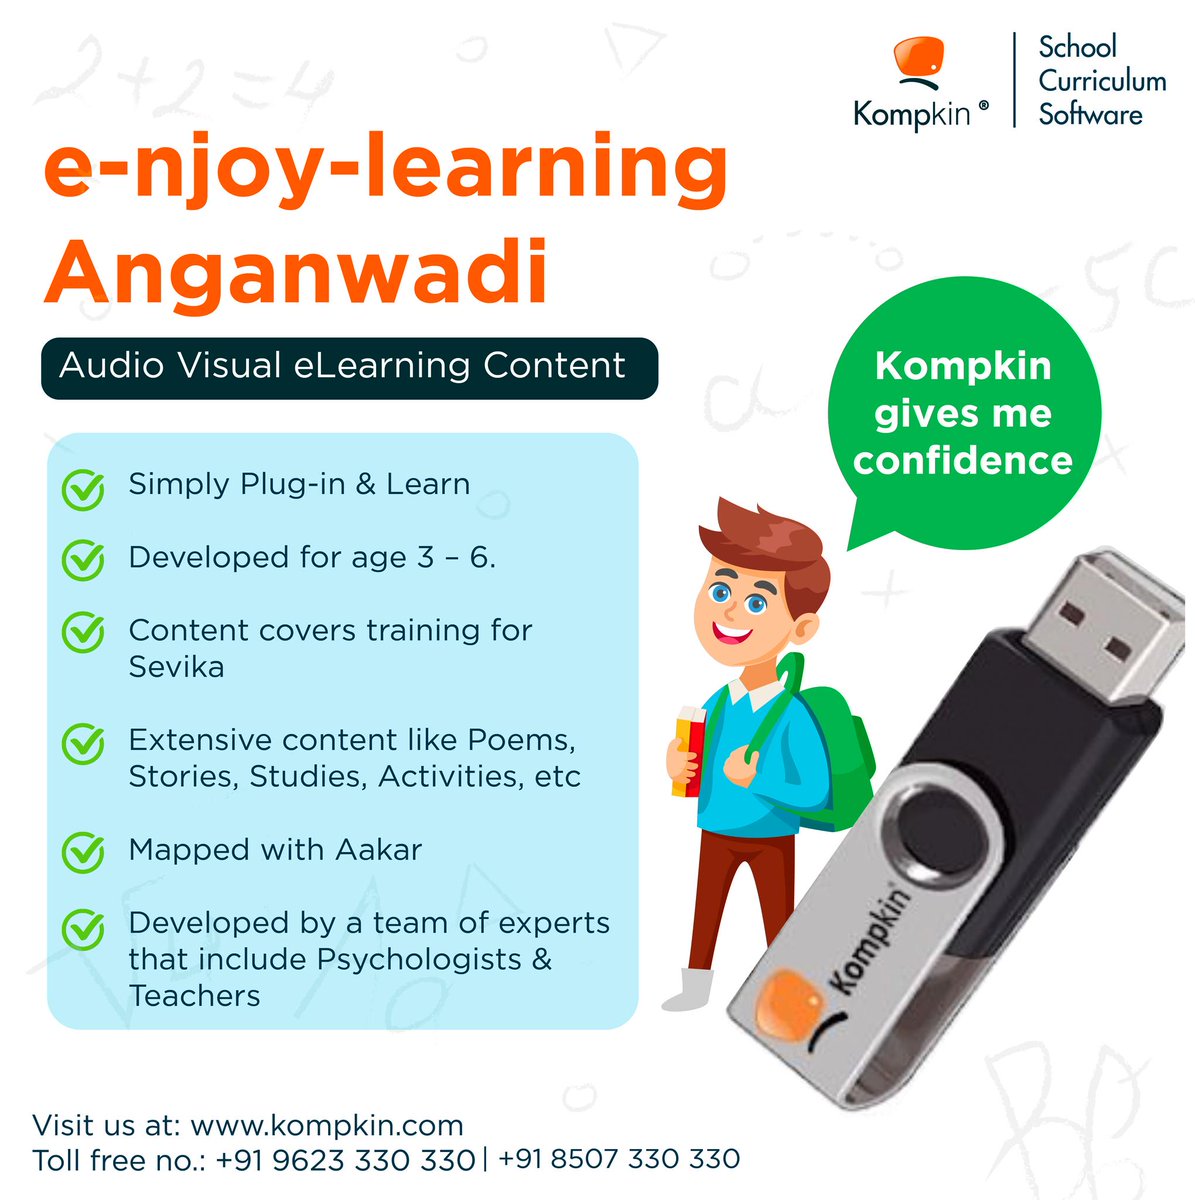 Enjoy Learning #Anganwadi through 'Kompkin Pendrive' where you can find Audio Visual #eLearning #Content😊
Give us a call to know more about us
📞 +91 96233 0330 / +91 85073 30330
#funlearn #marathieducation #Audiovisualcurriculum #Anganwadi #Activities  #onlineclassroom #csr